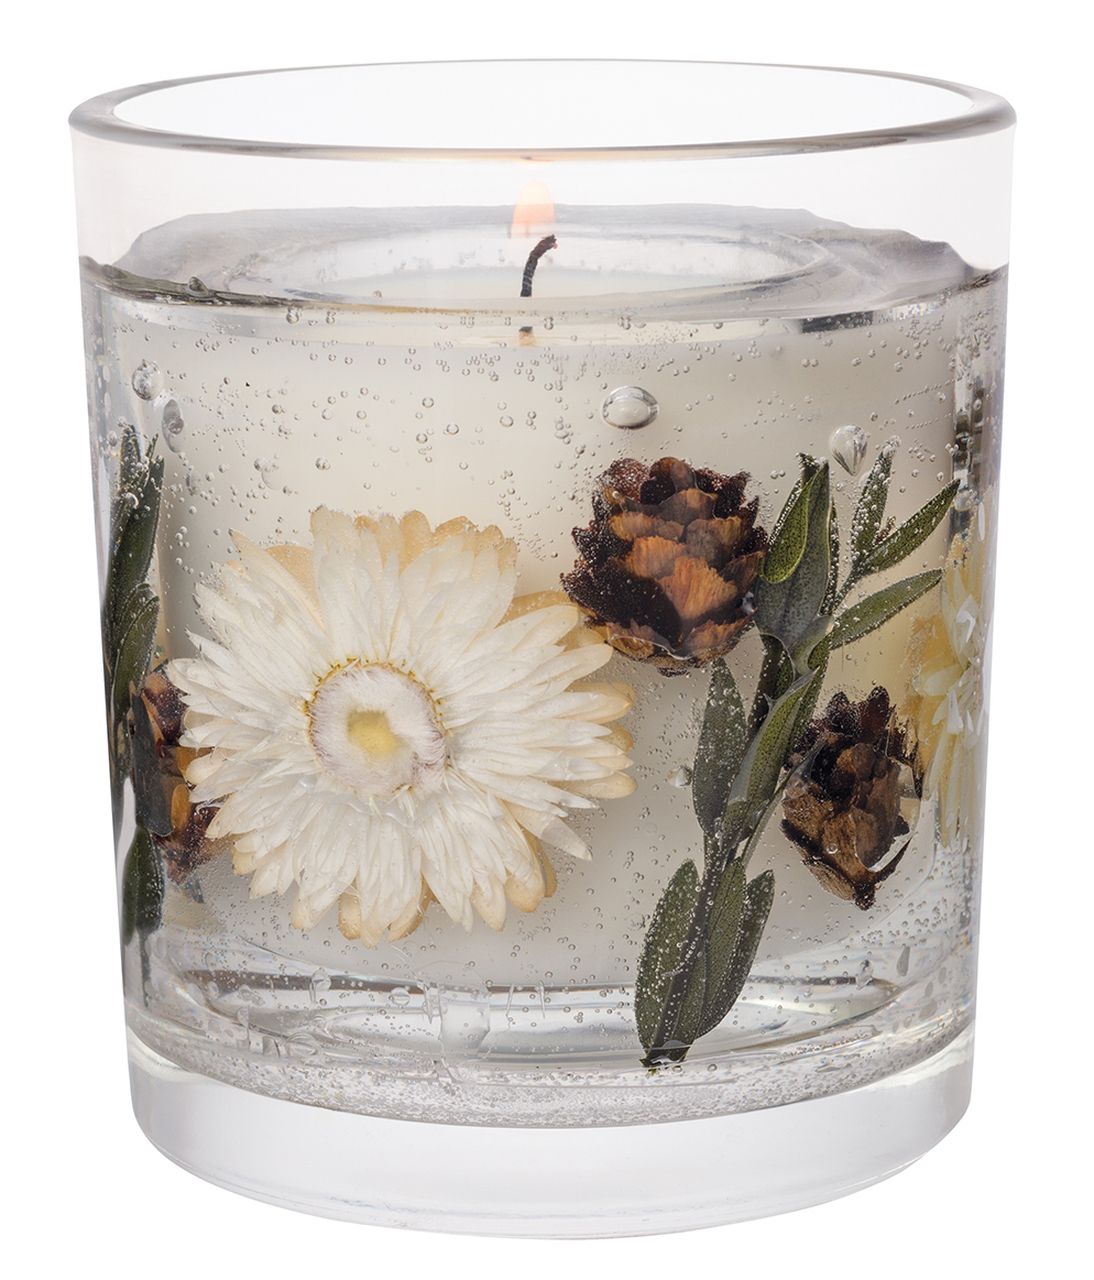 Amber Woods Blossom Stoneglow Scented Natural Wax Botanical Candle - 30 Hour